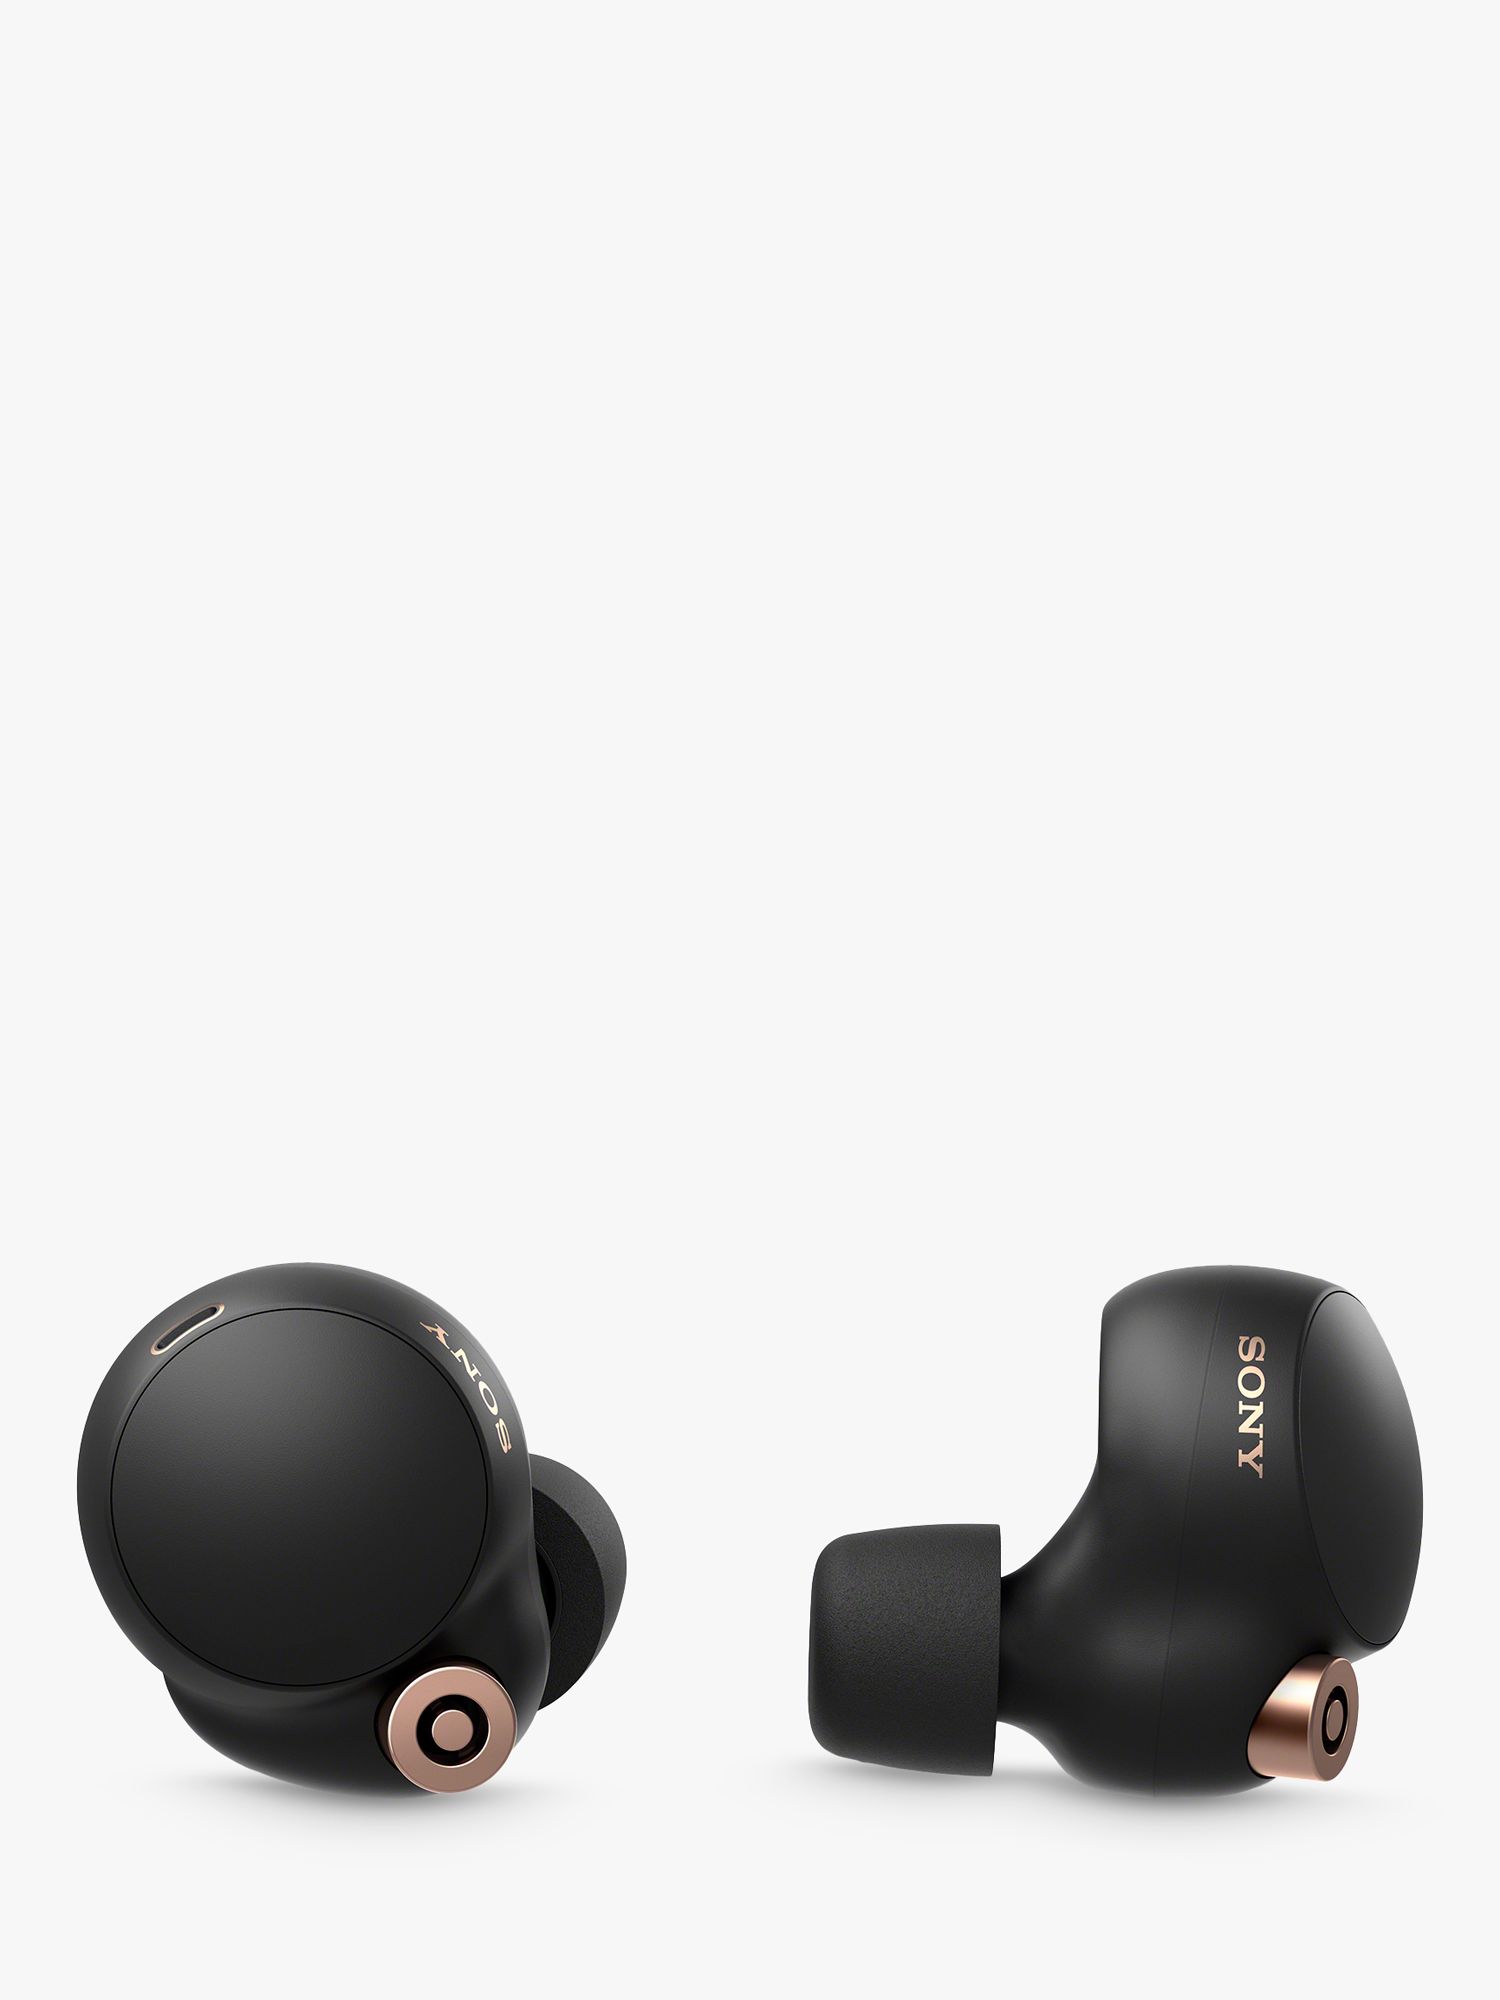 Sony WF-1000XM4 Noise Cancelling True Wireless Bluetooth Sweat & Weather- Resistant In-Ear Headphones with Mic/Remote, Black